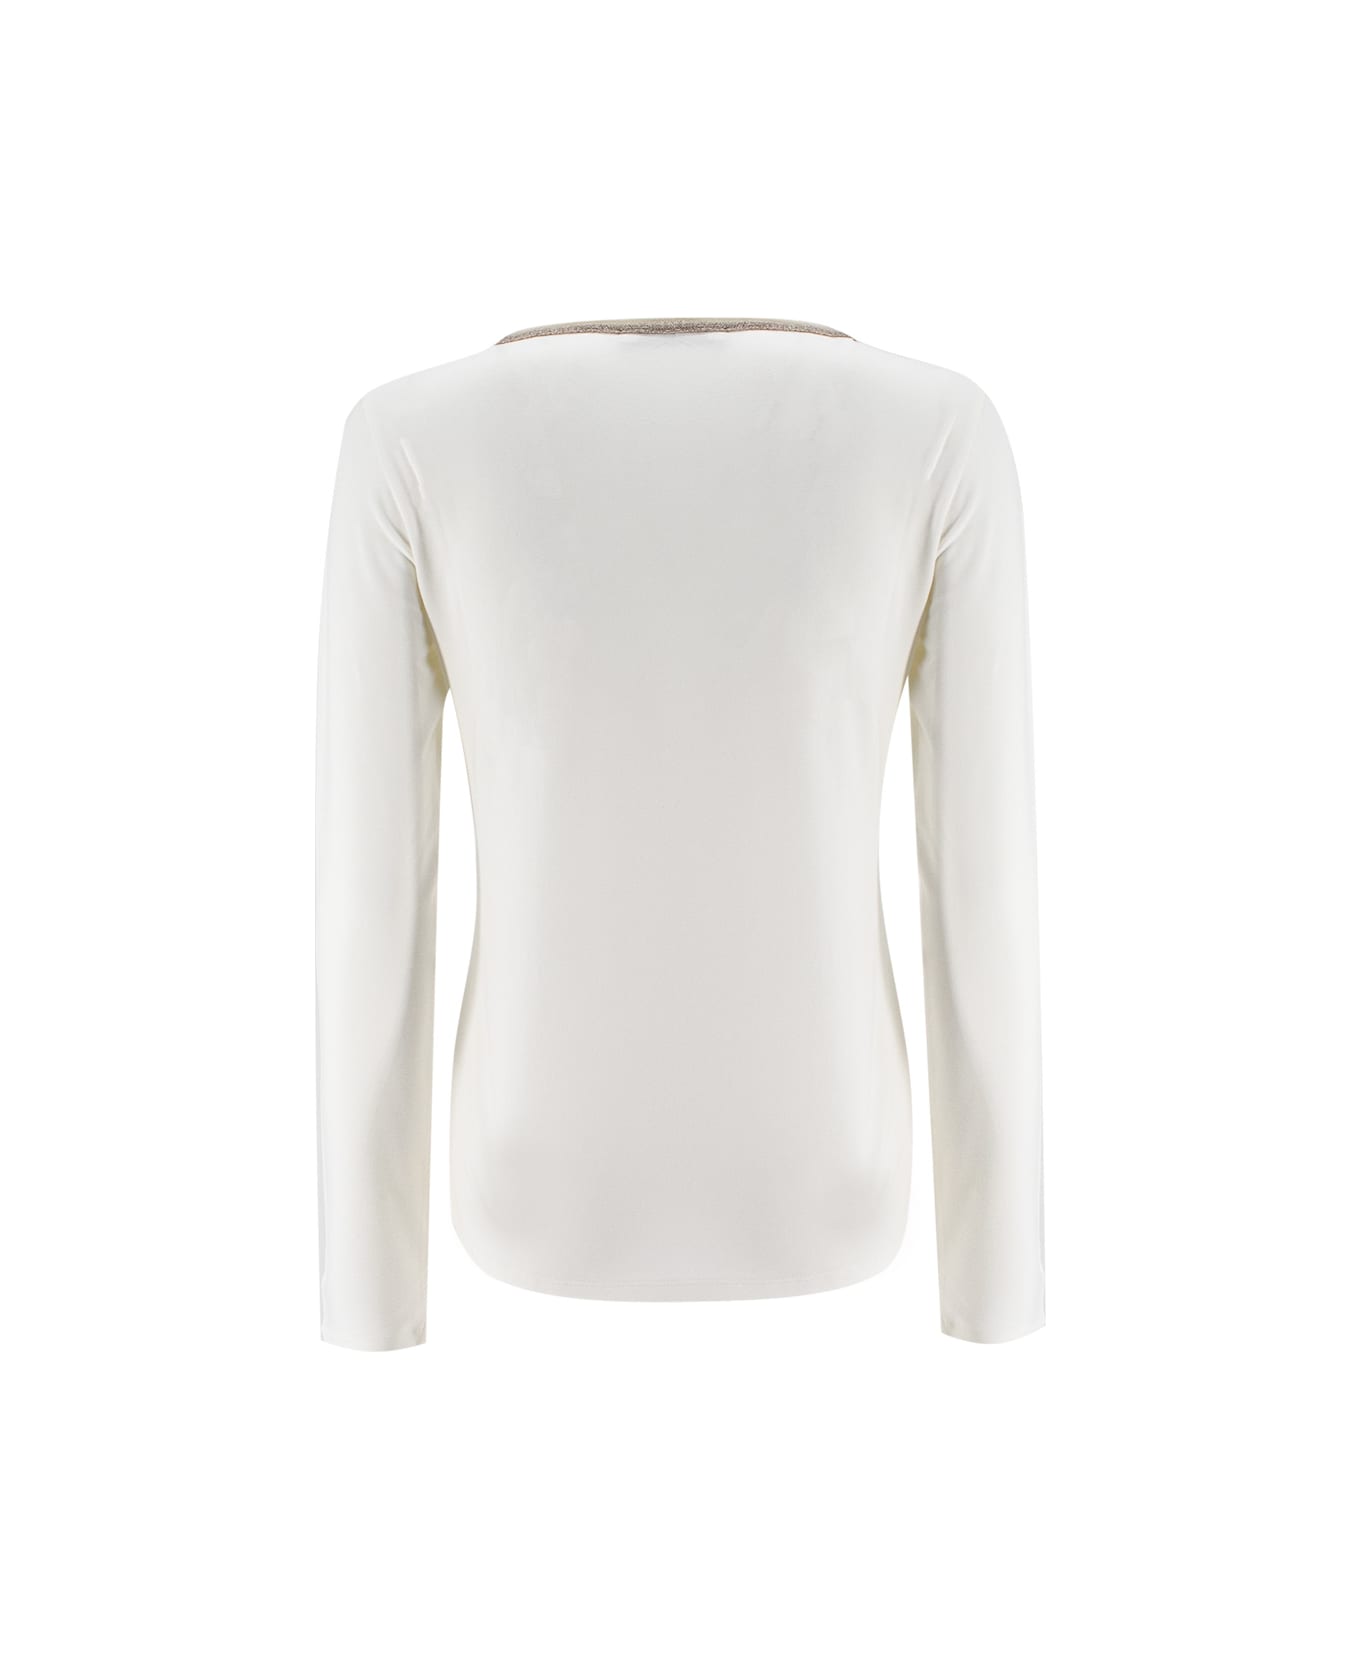 Le Tricot Perugia Sweater - OFFWHIT/OFFWHITE/BEI